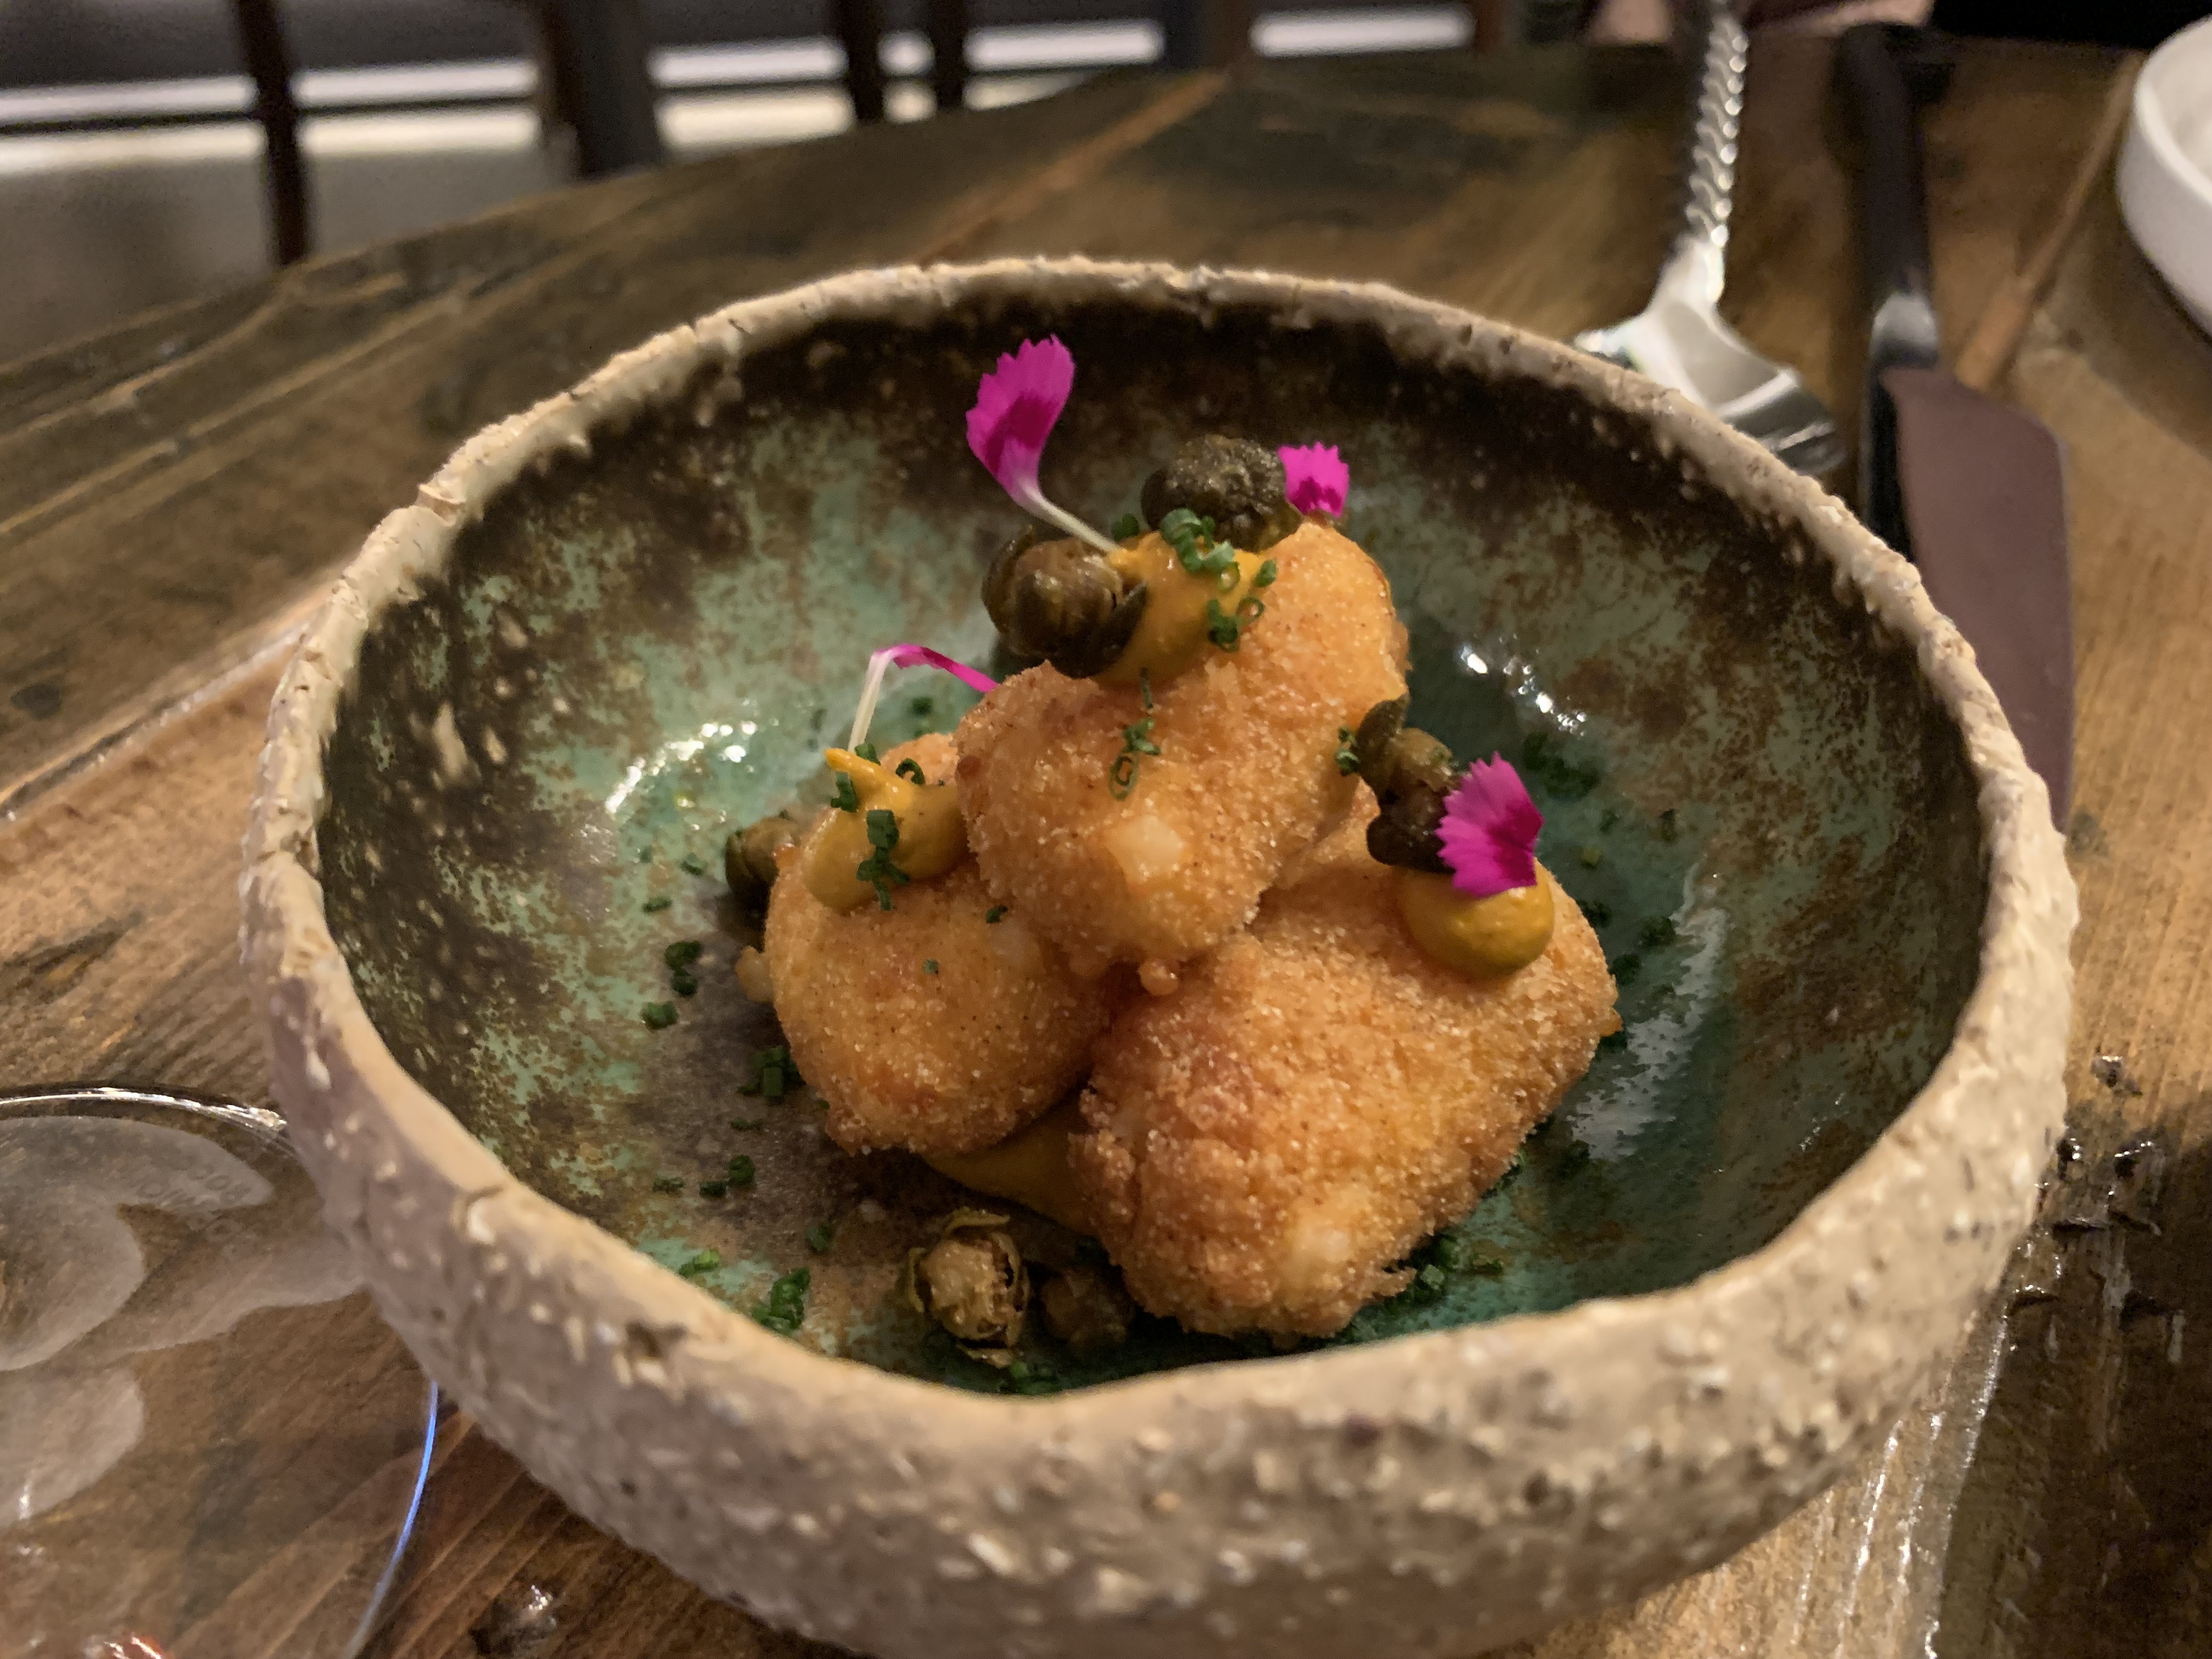 Stack of fried cheese curds in a bowl, with dollops of orange sauce and capers